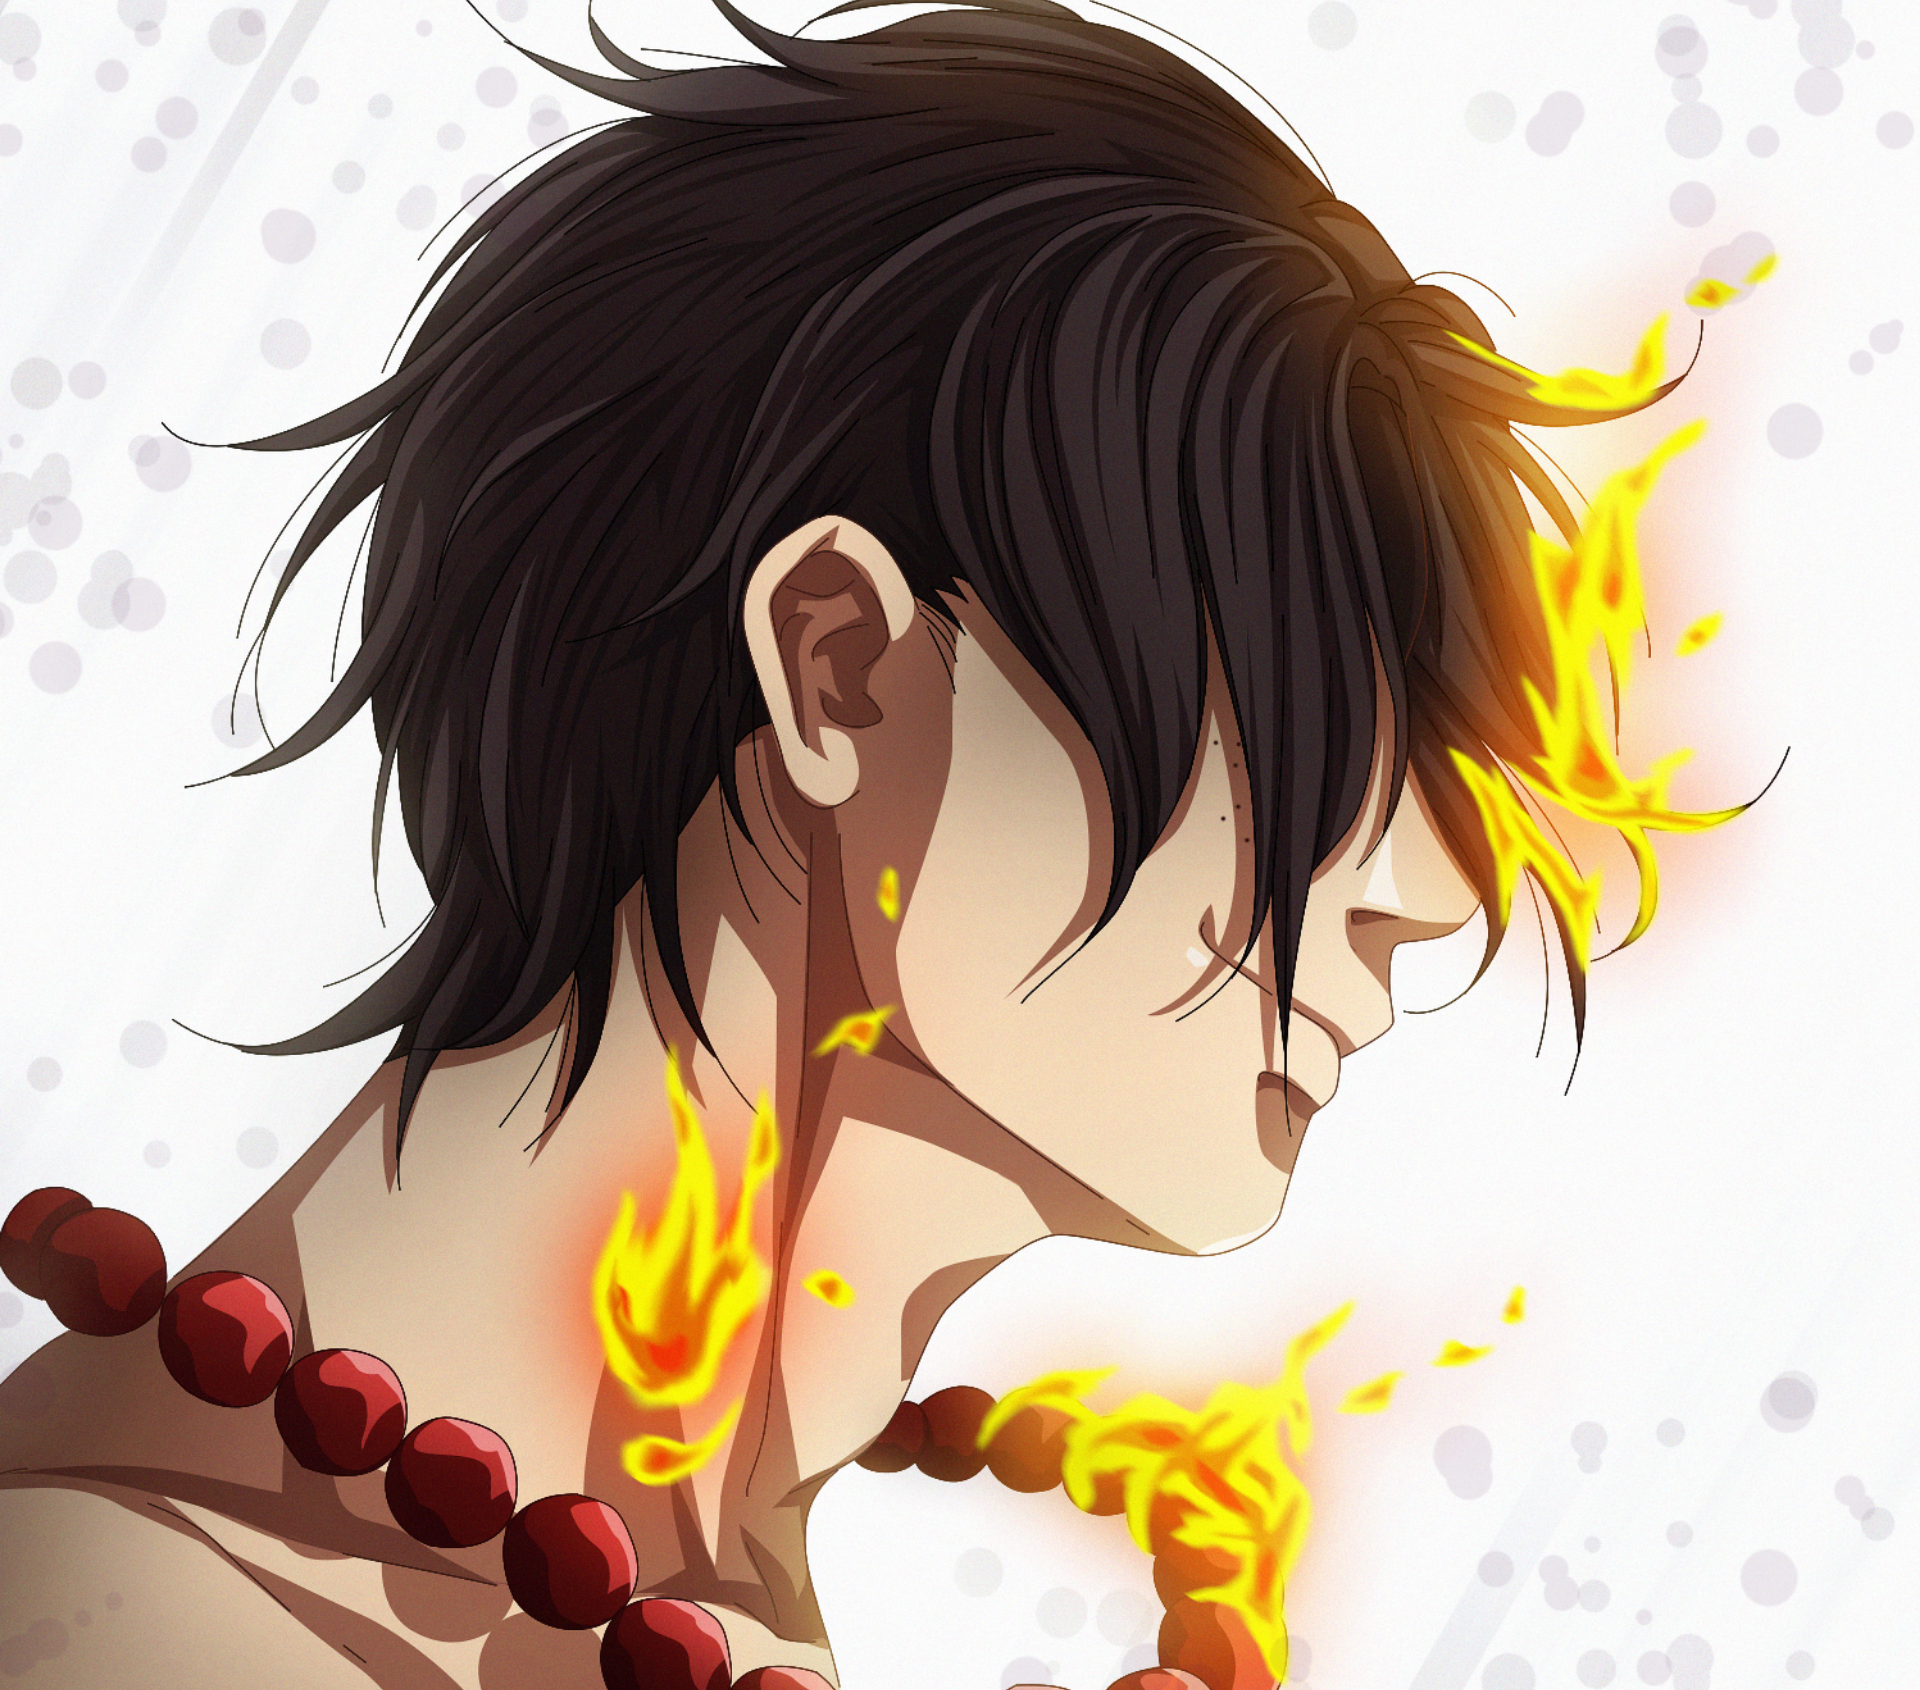 Wallpaper One Piece Ice : One Piece Hd Wallpaper For Android Apk ...